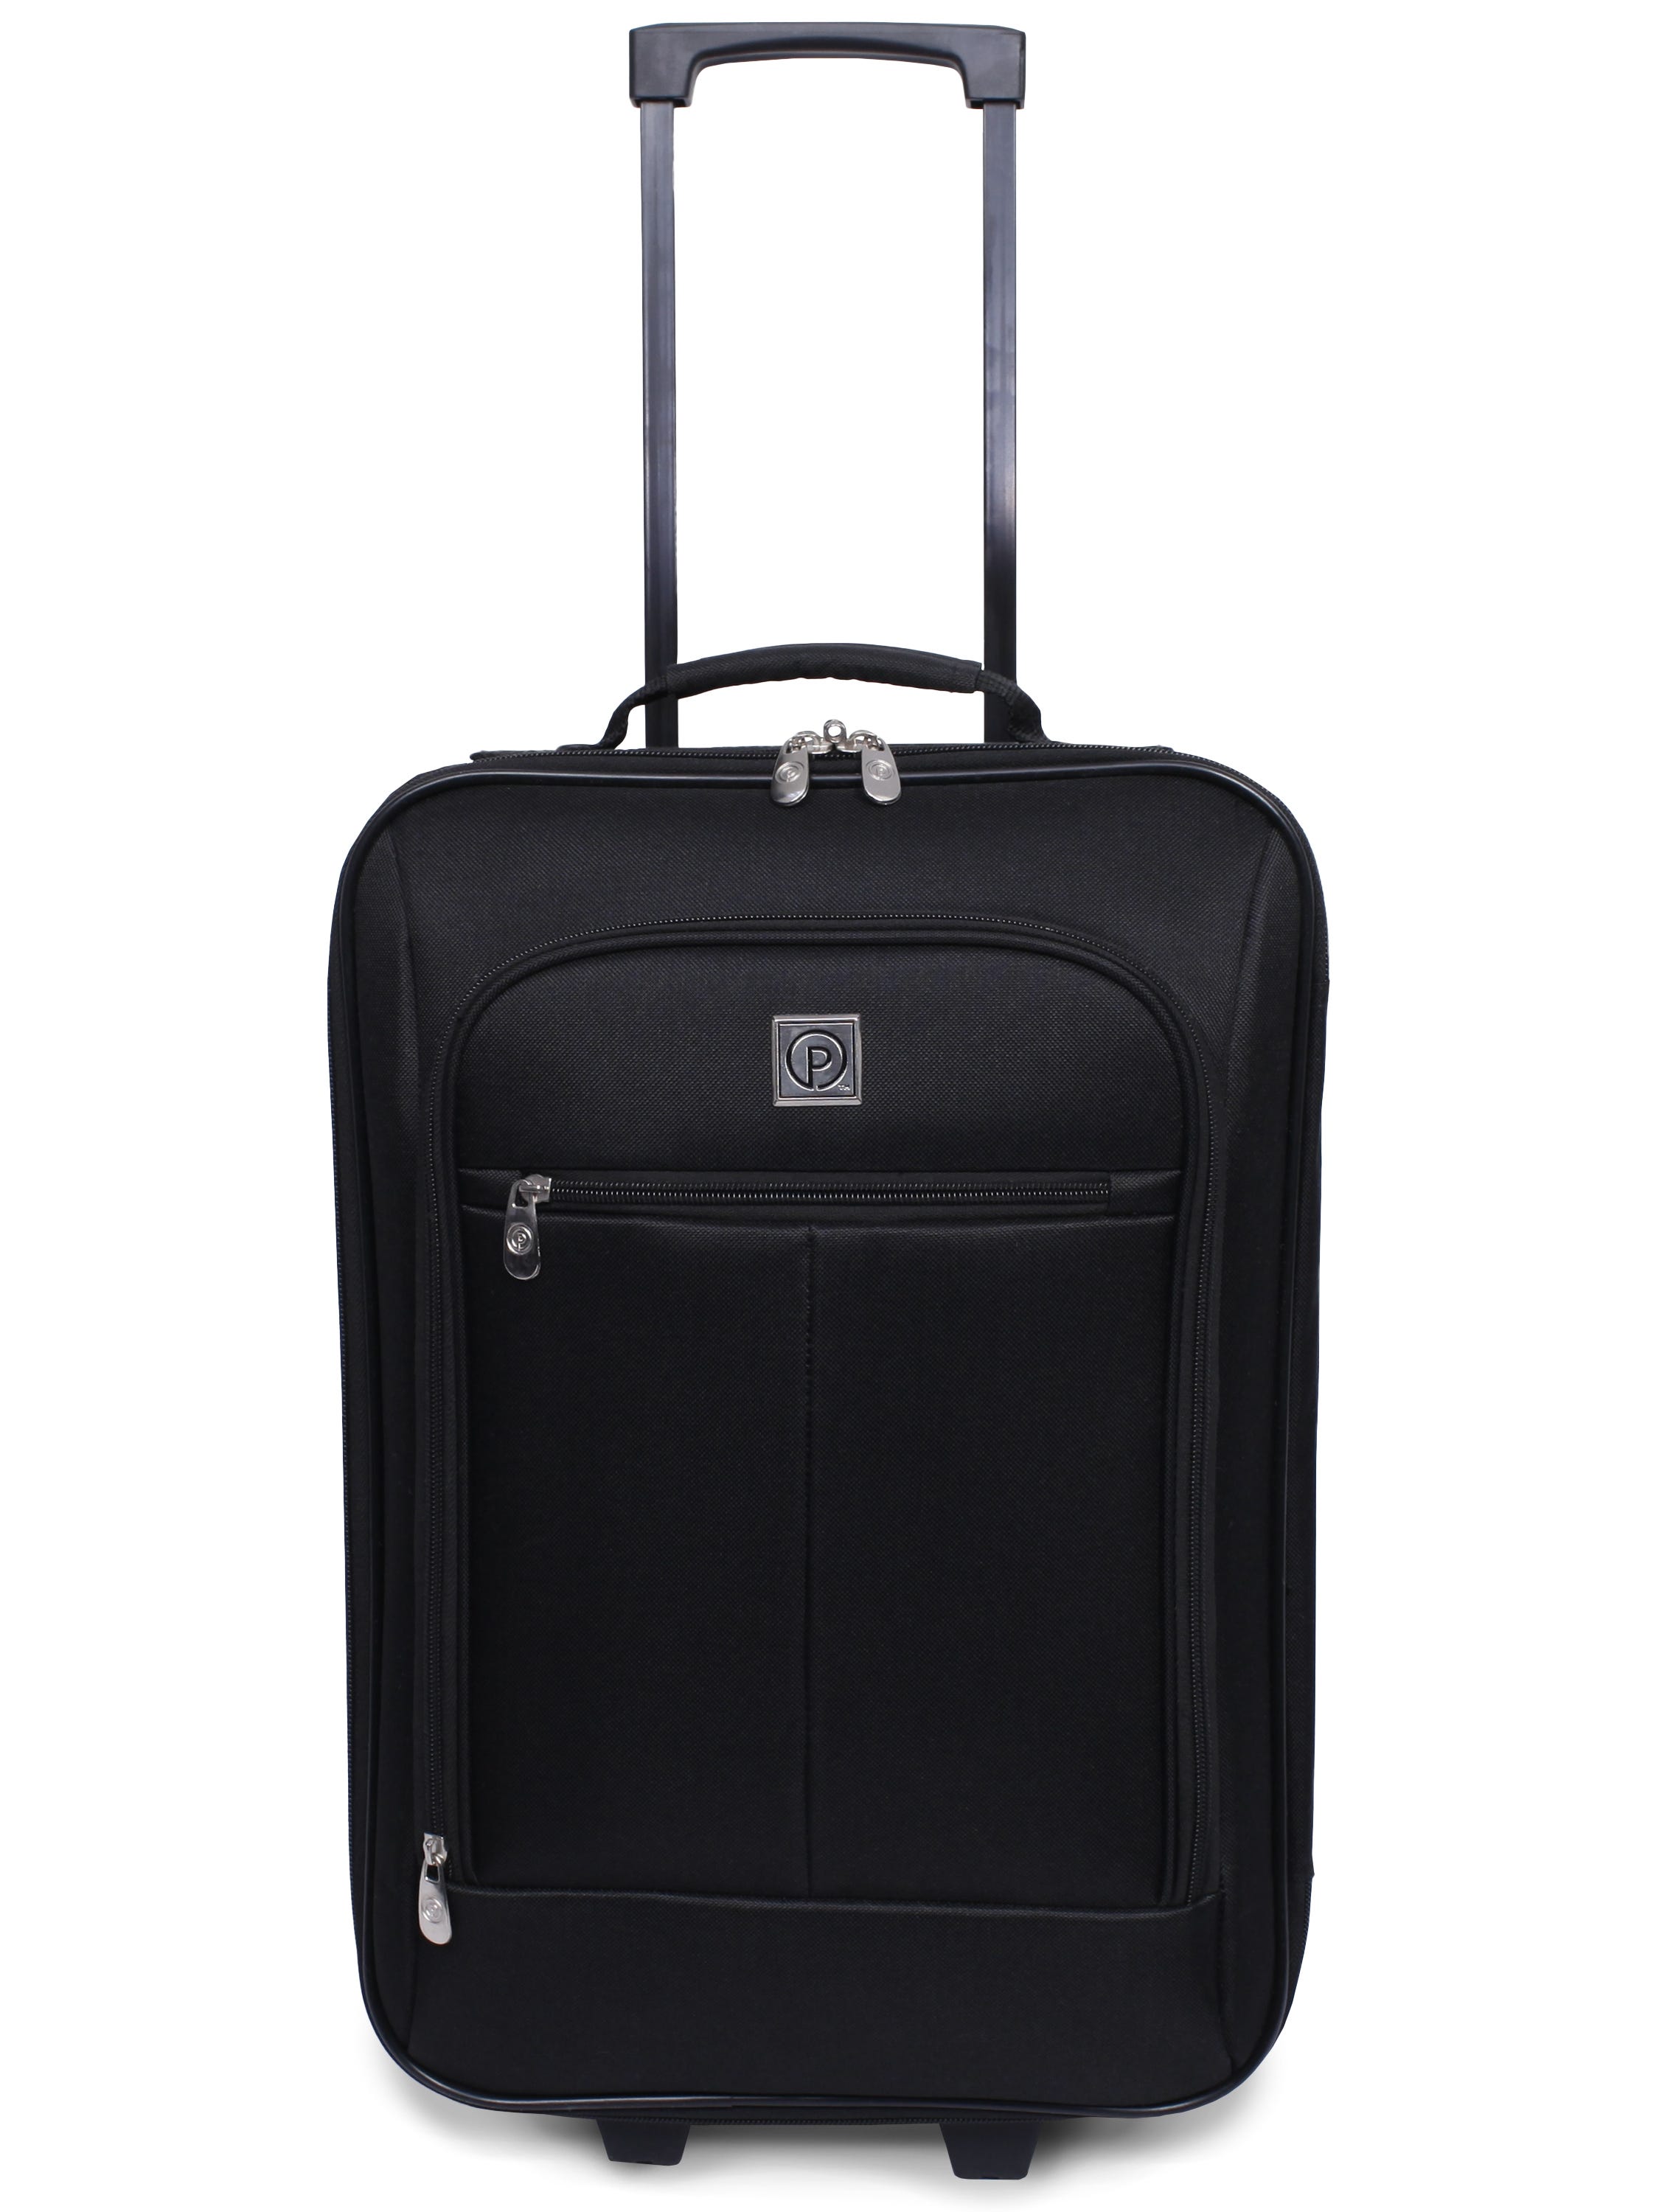 10 Best CarryOn Luggage Options for Travel  The Travel Hack